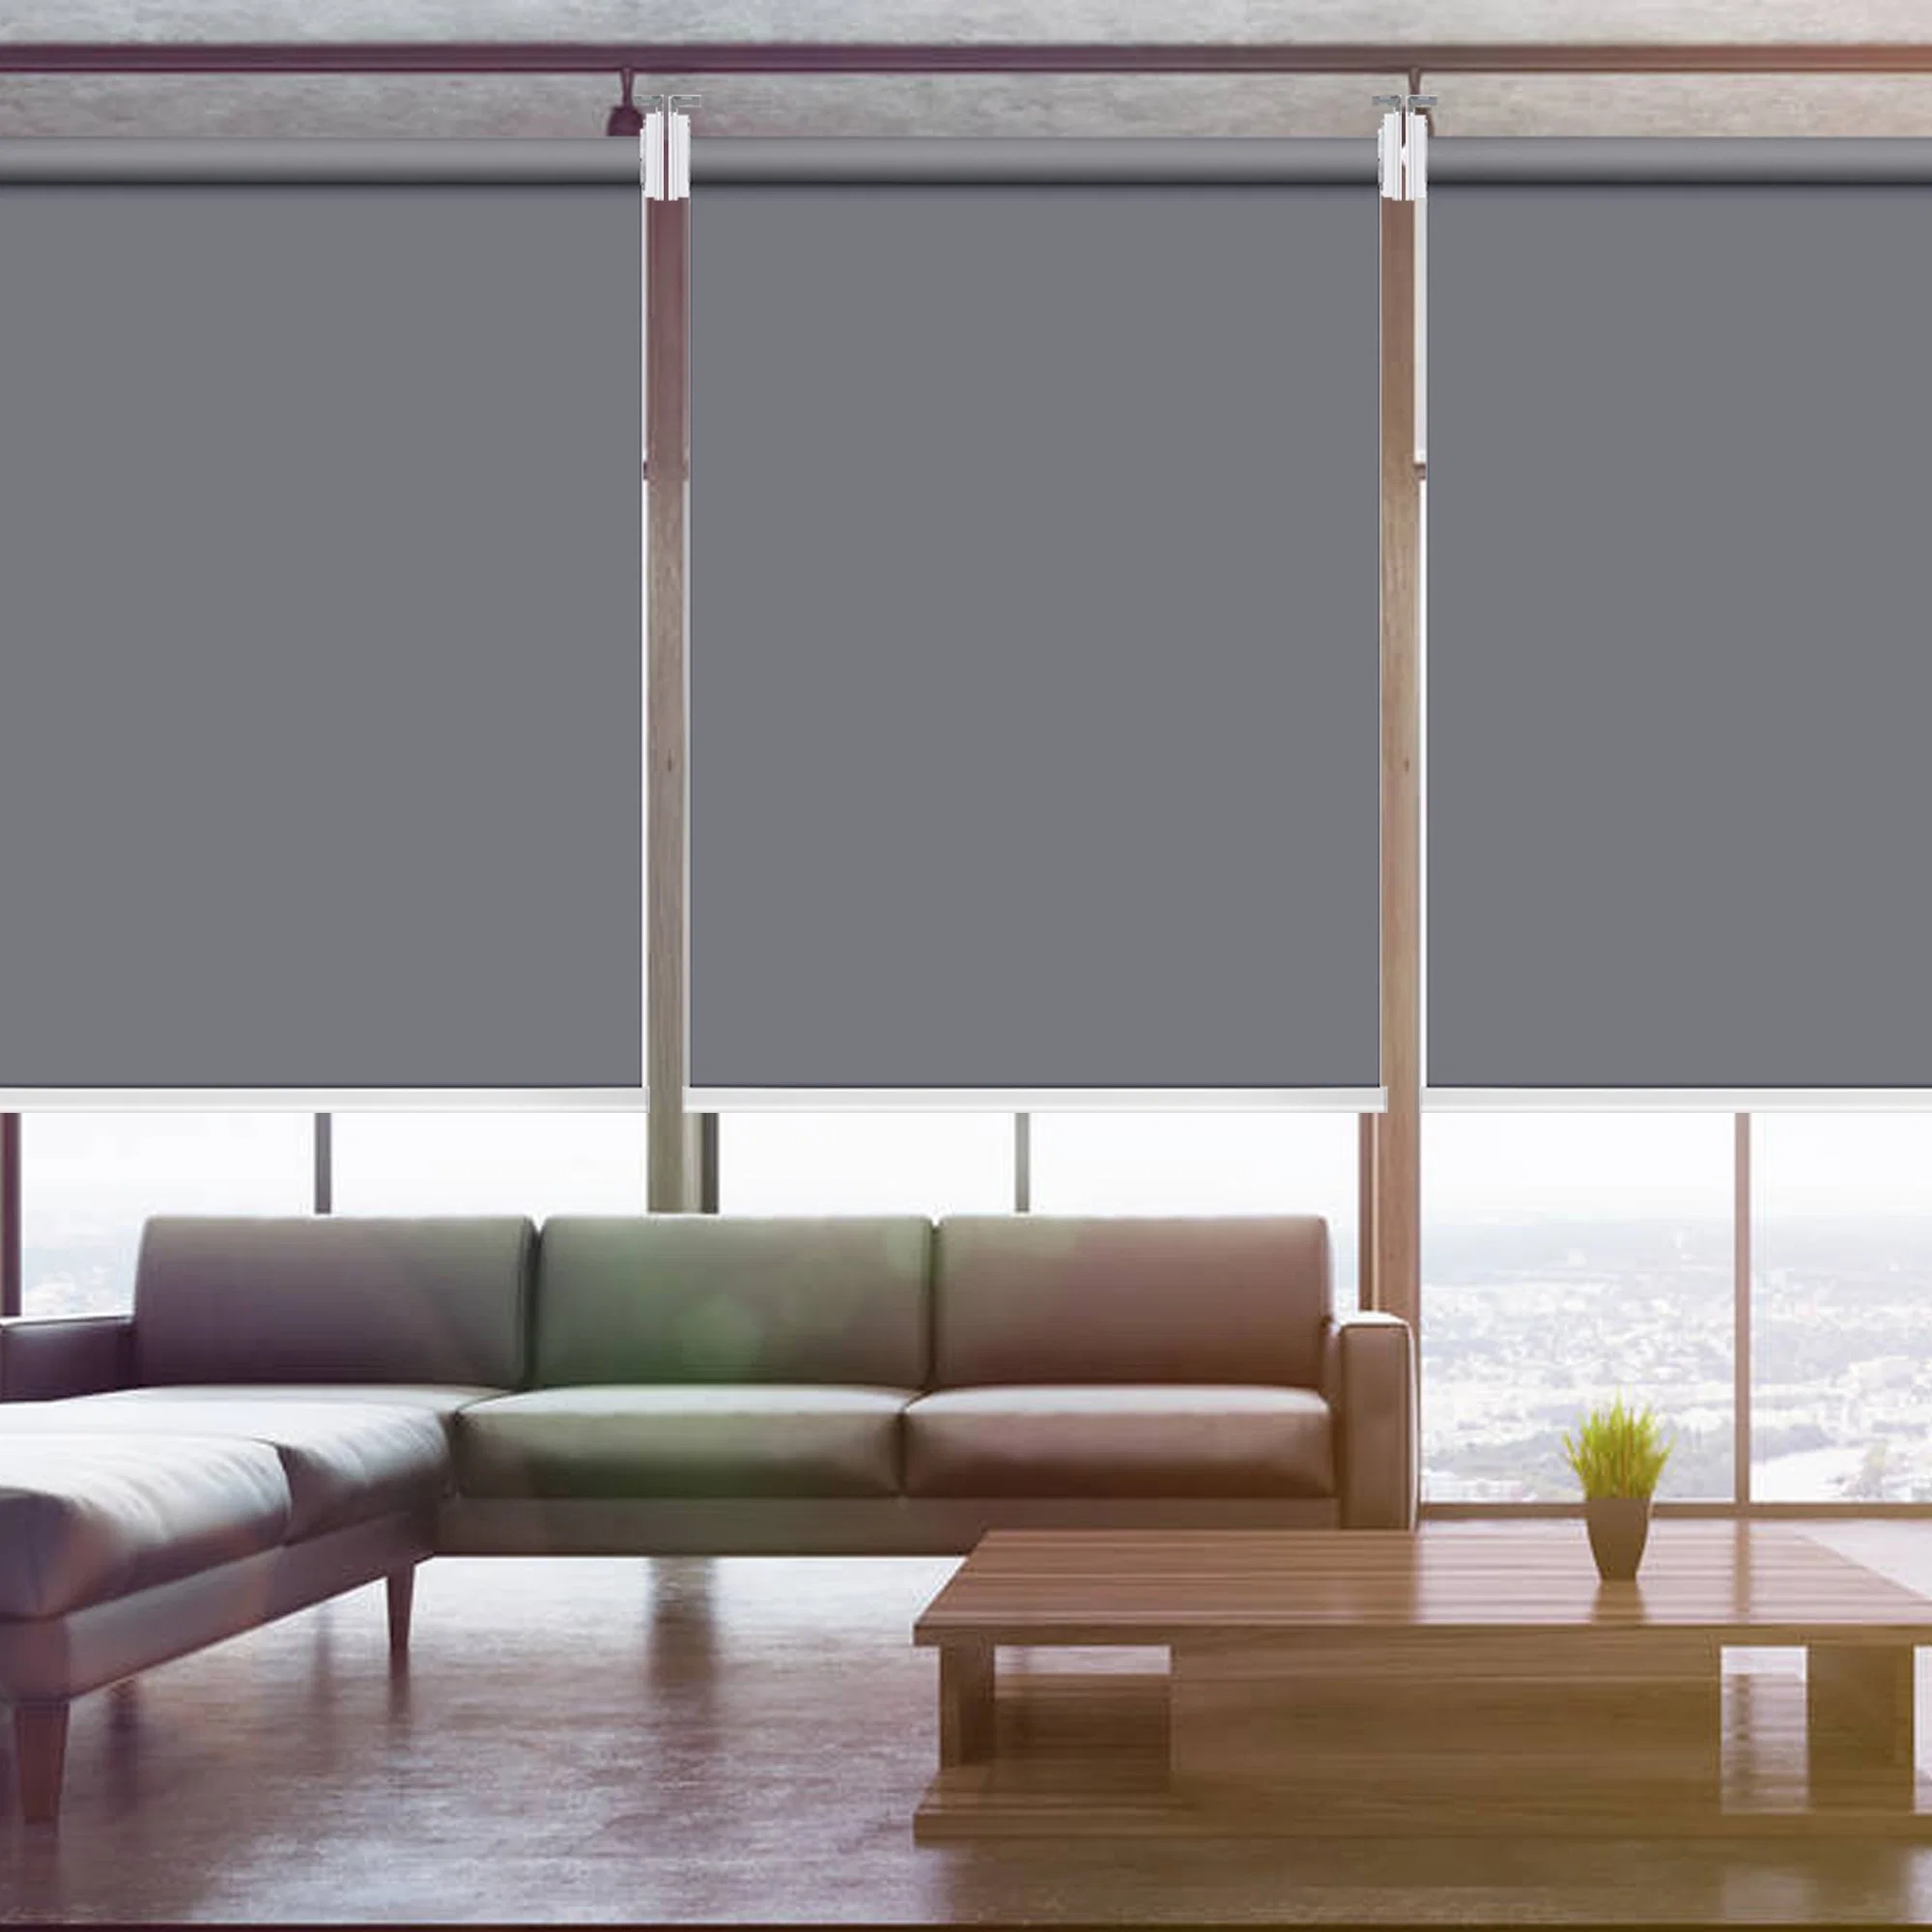 Unisign Hot Sale Window Shades Solid Color Curtain Fabric for Roller Blinds Window Blind Fabric